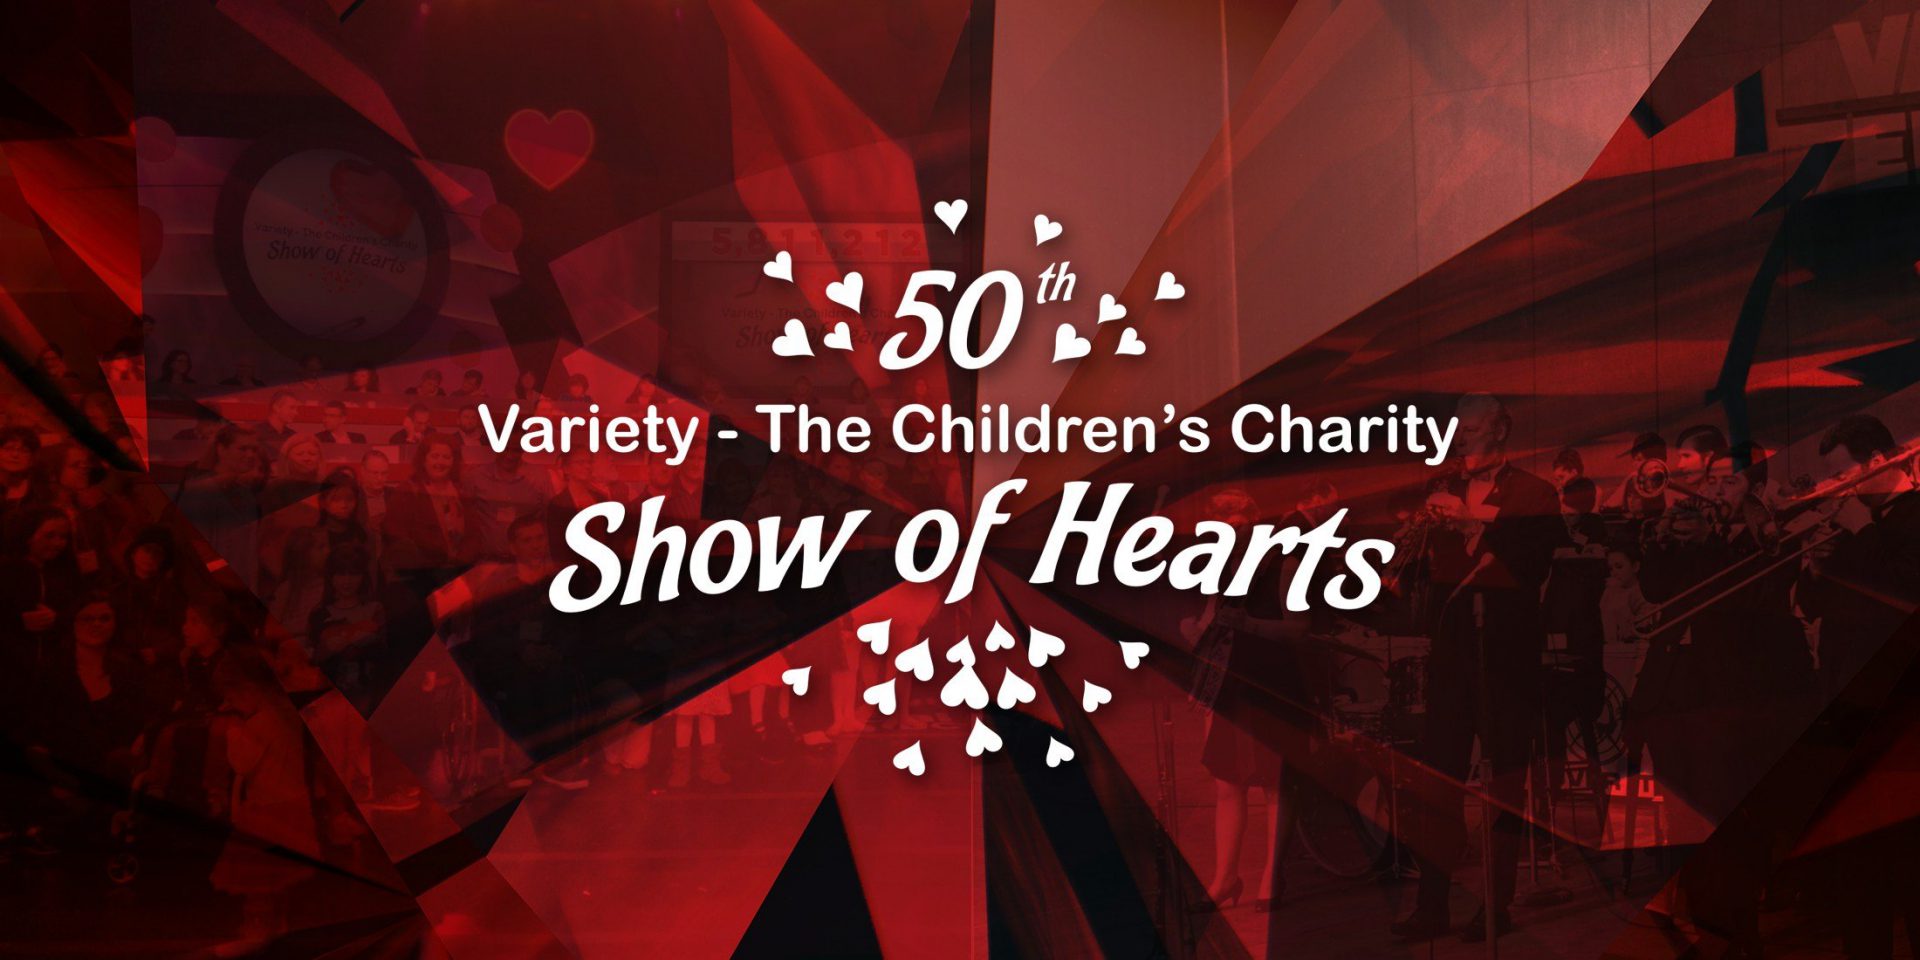 50th annual Variety Children’s Charity Telethon tonight